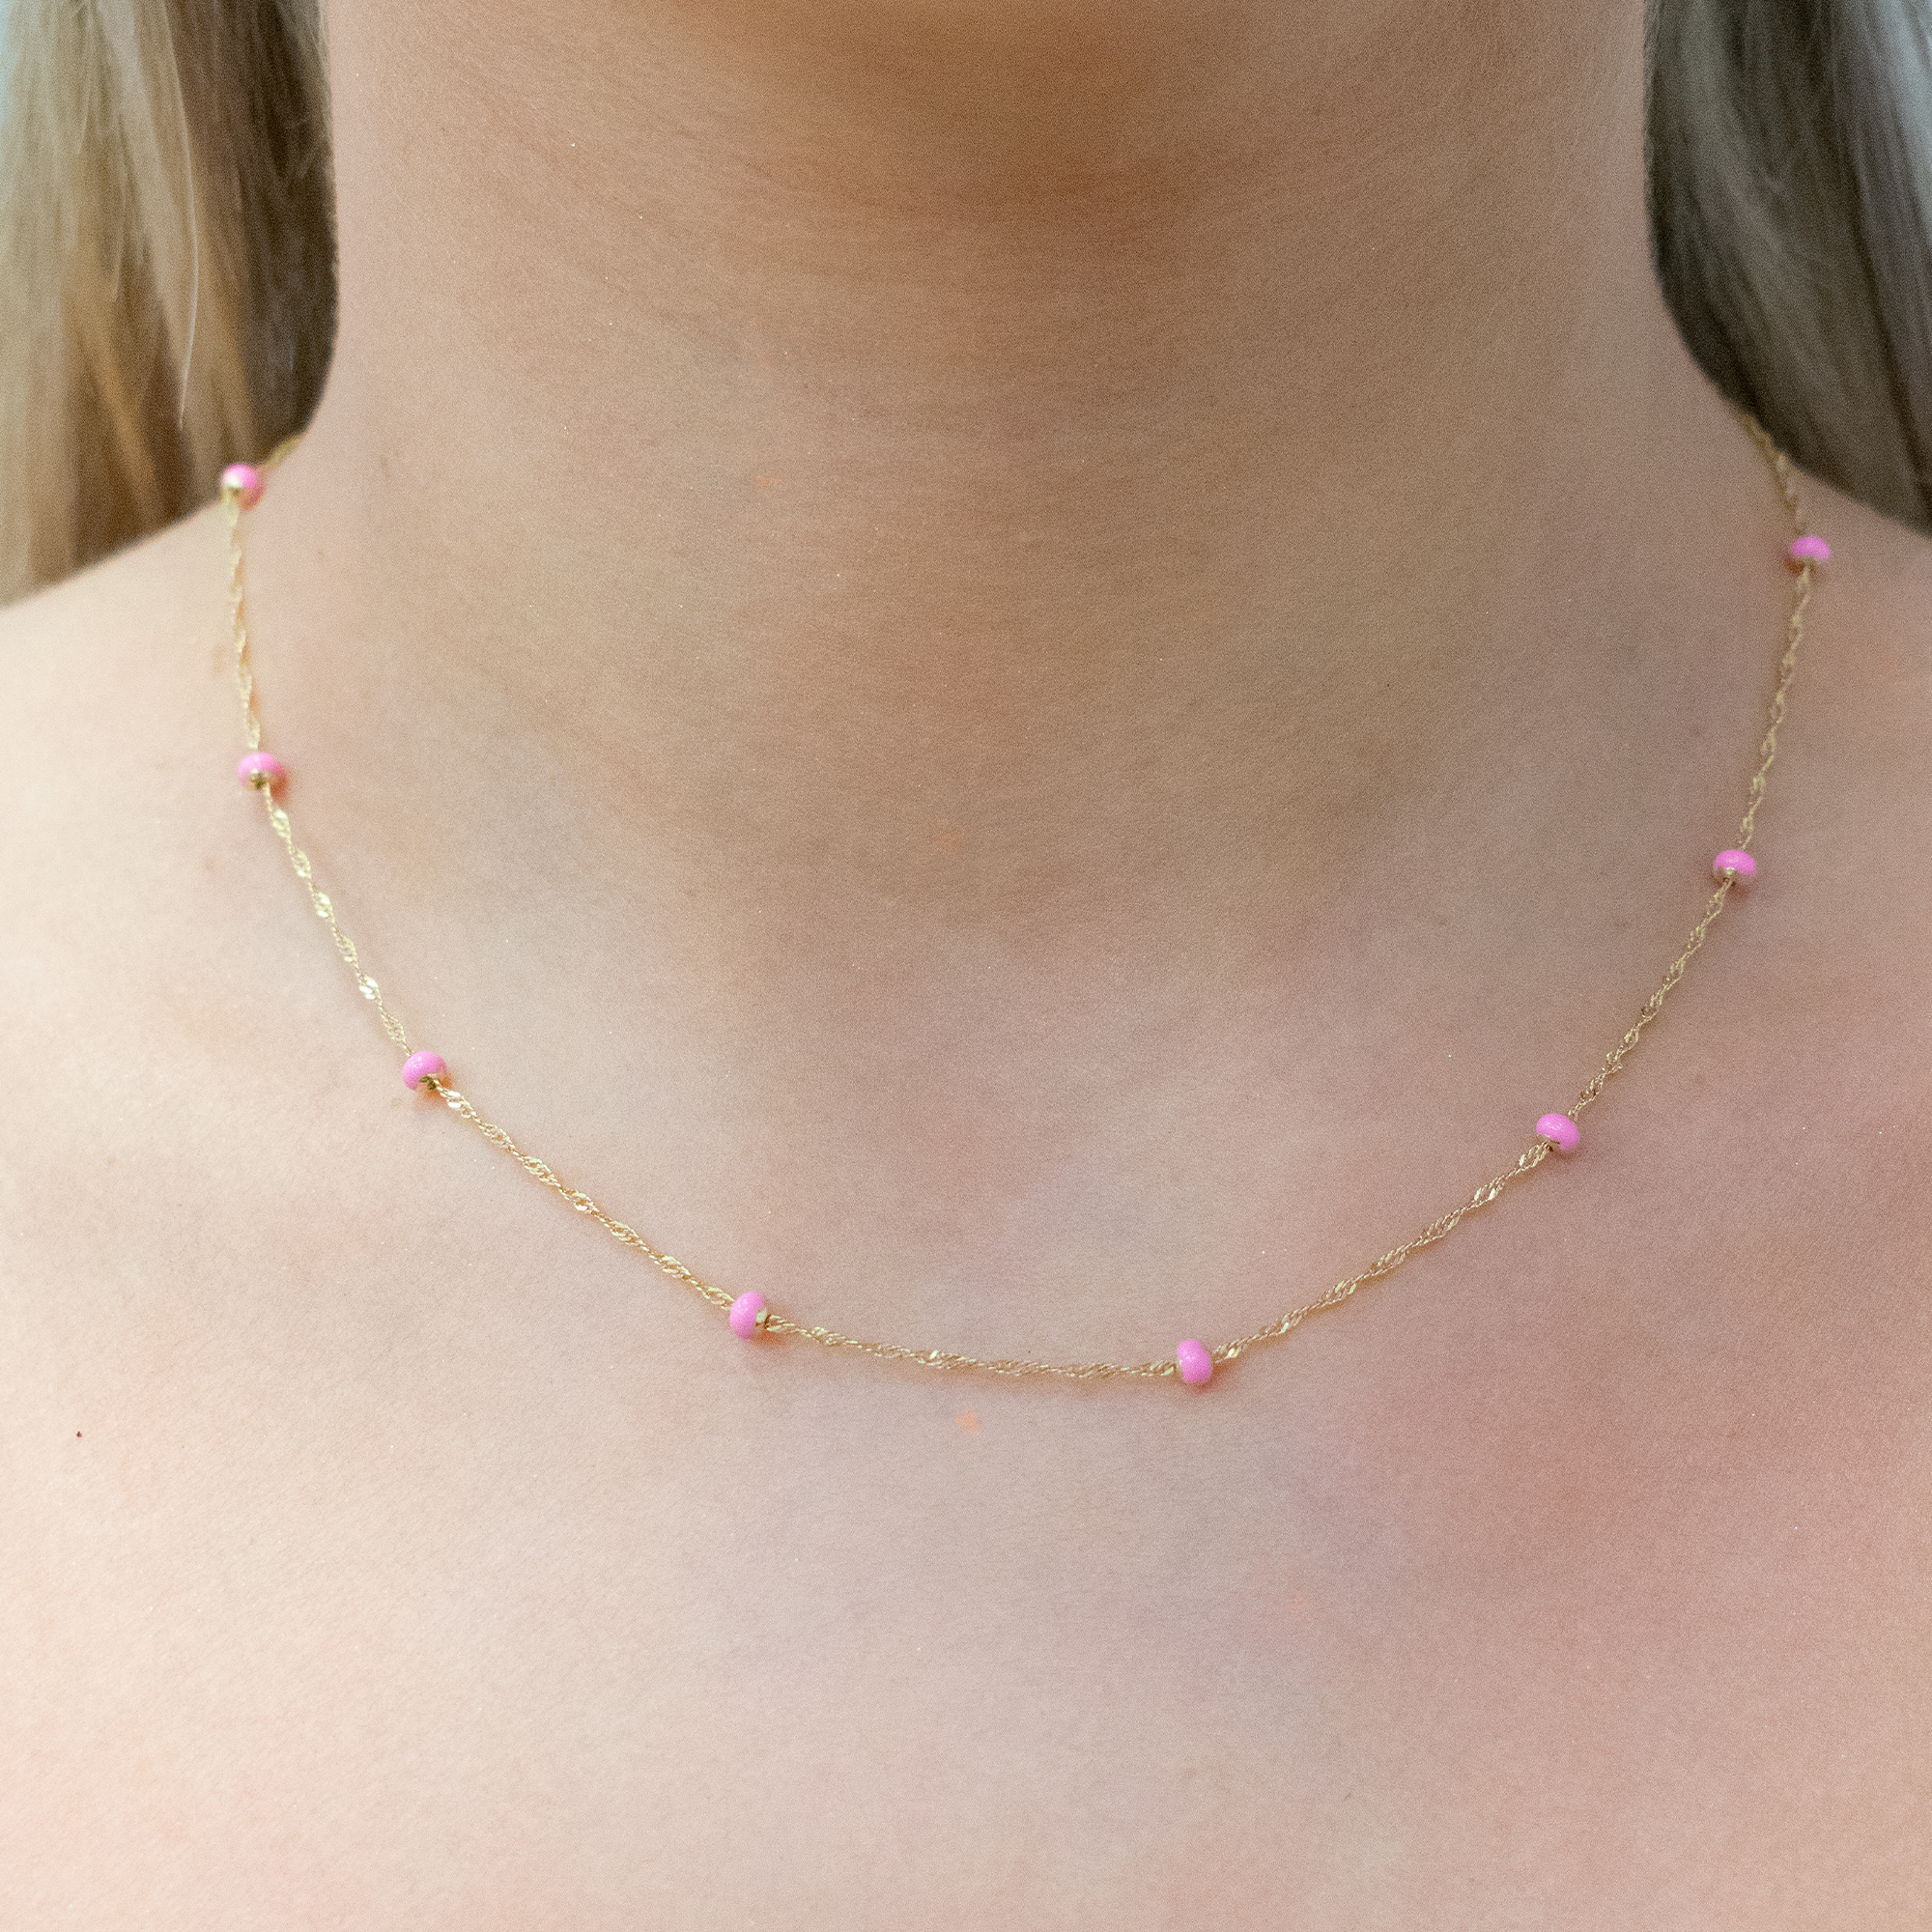 THE PINK BALL CHAIN NECKLACE